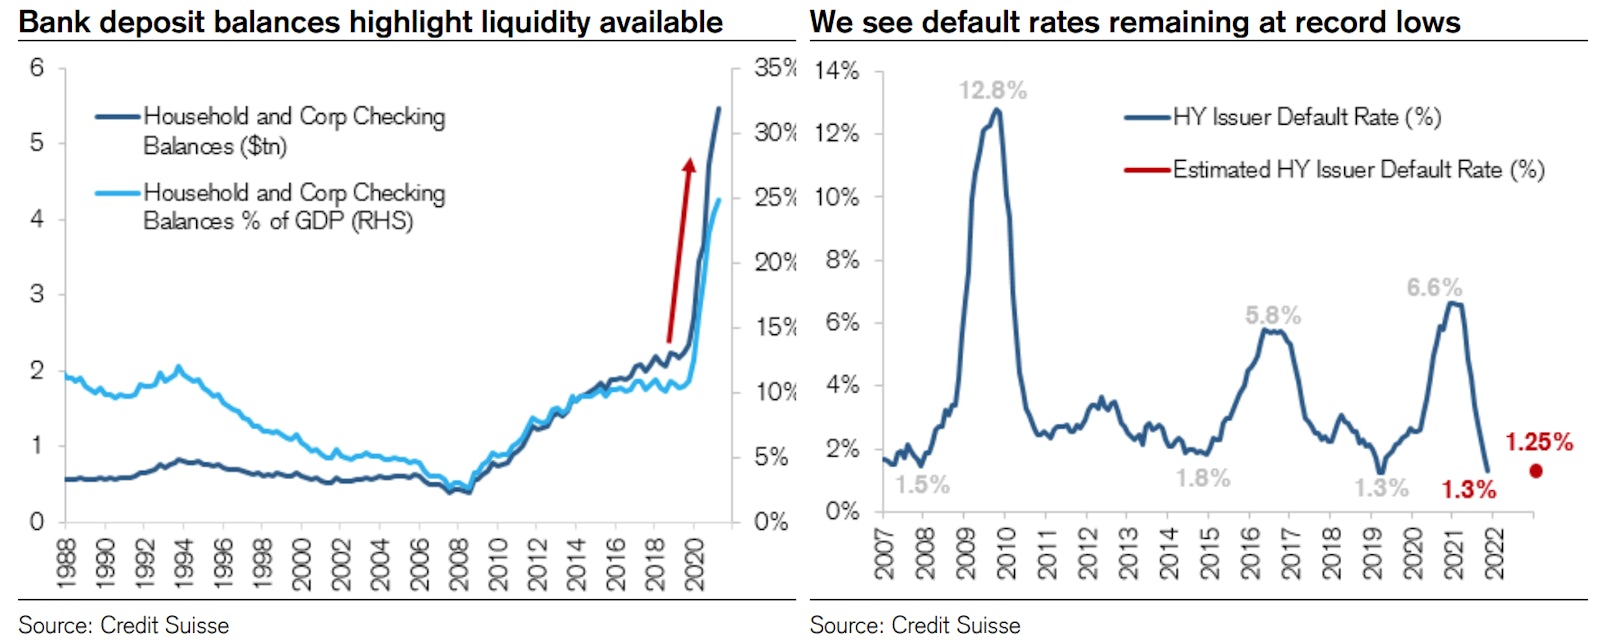 Credit Suisse Sees US HY Default Rates Staying In The 1.0-1.5% Range For 2022 | Source: Credit Suisse